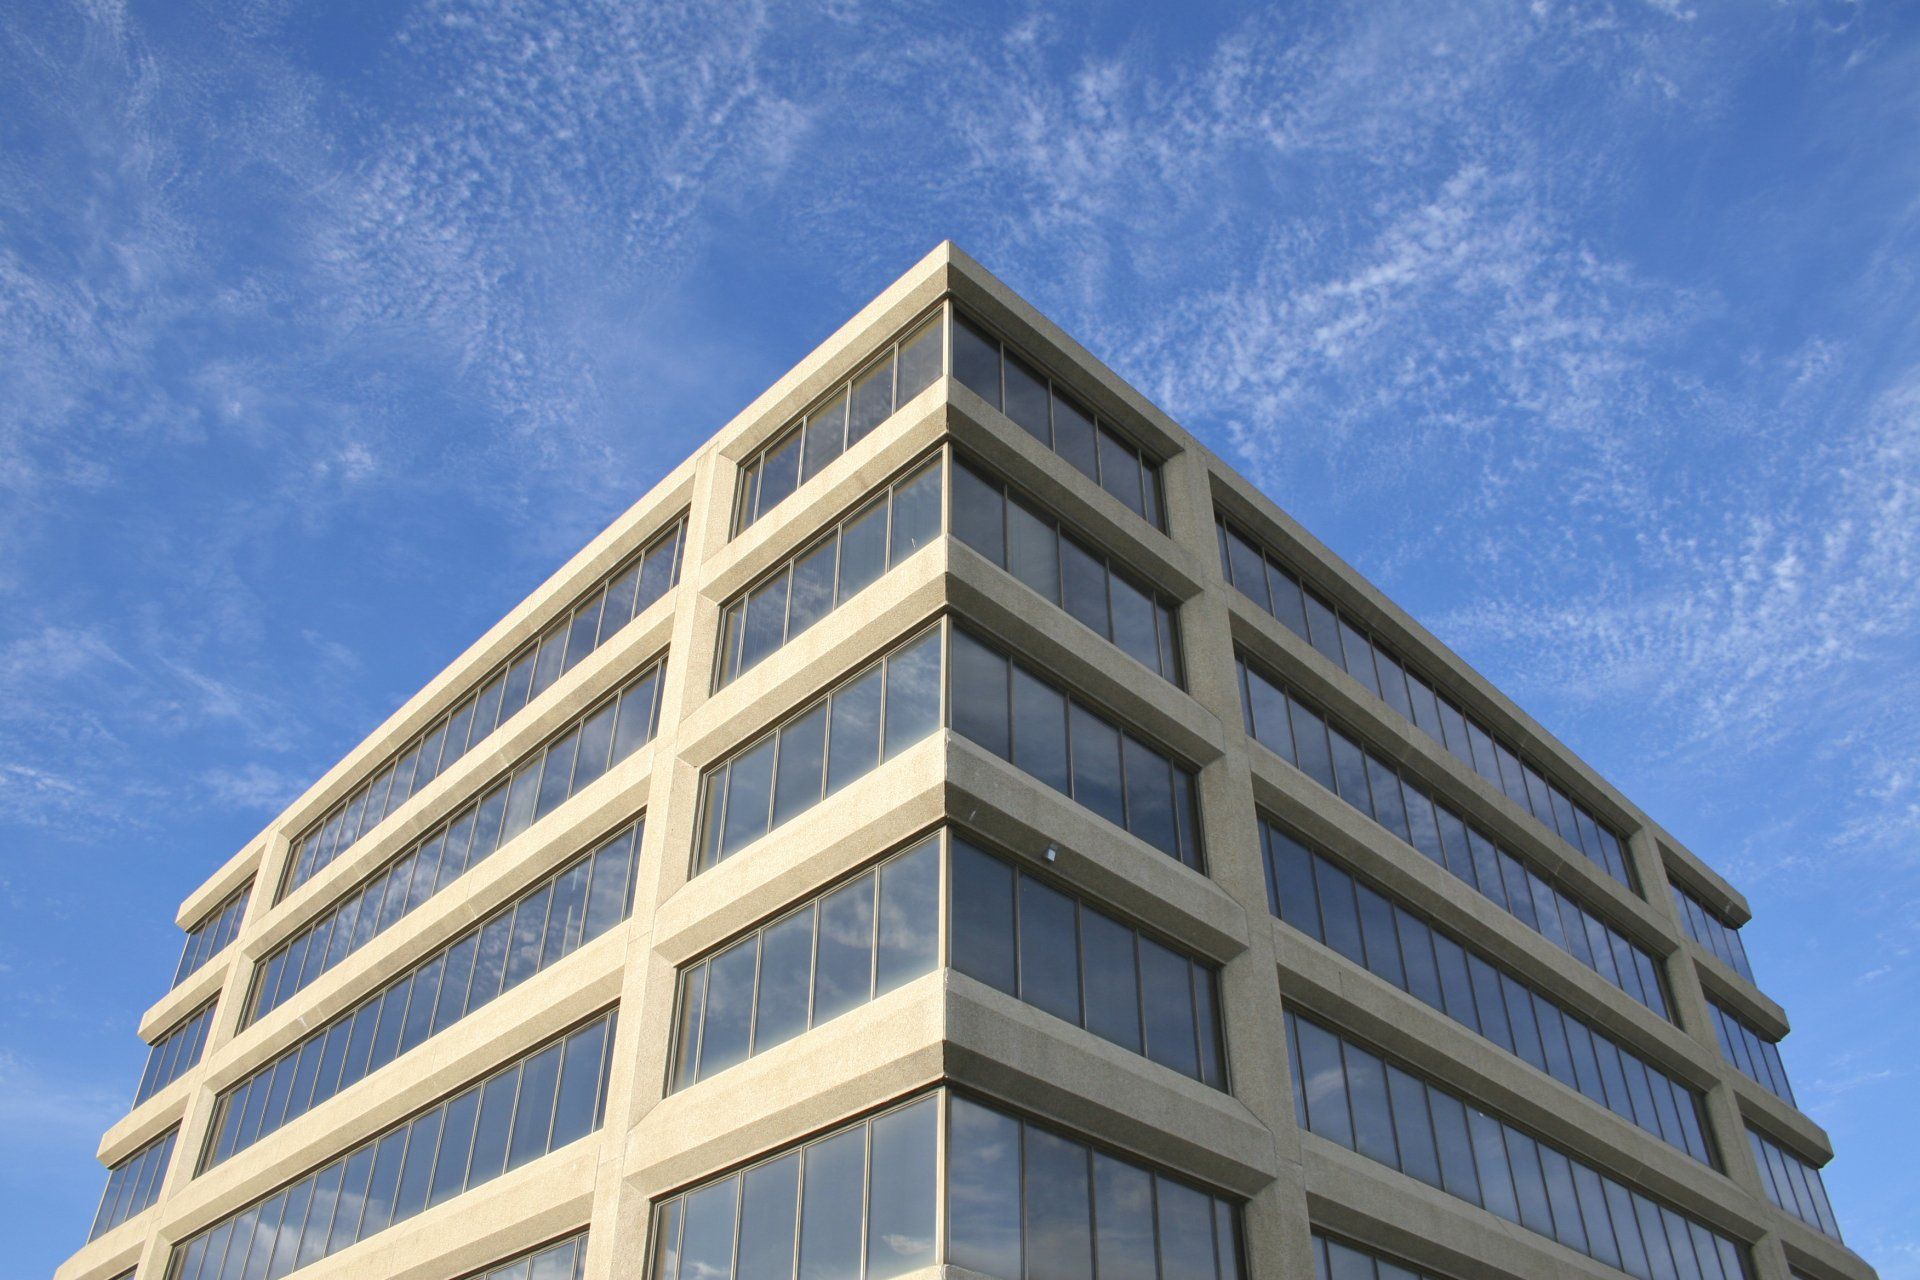 A multistory office building with a blue sky background